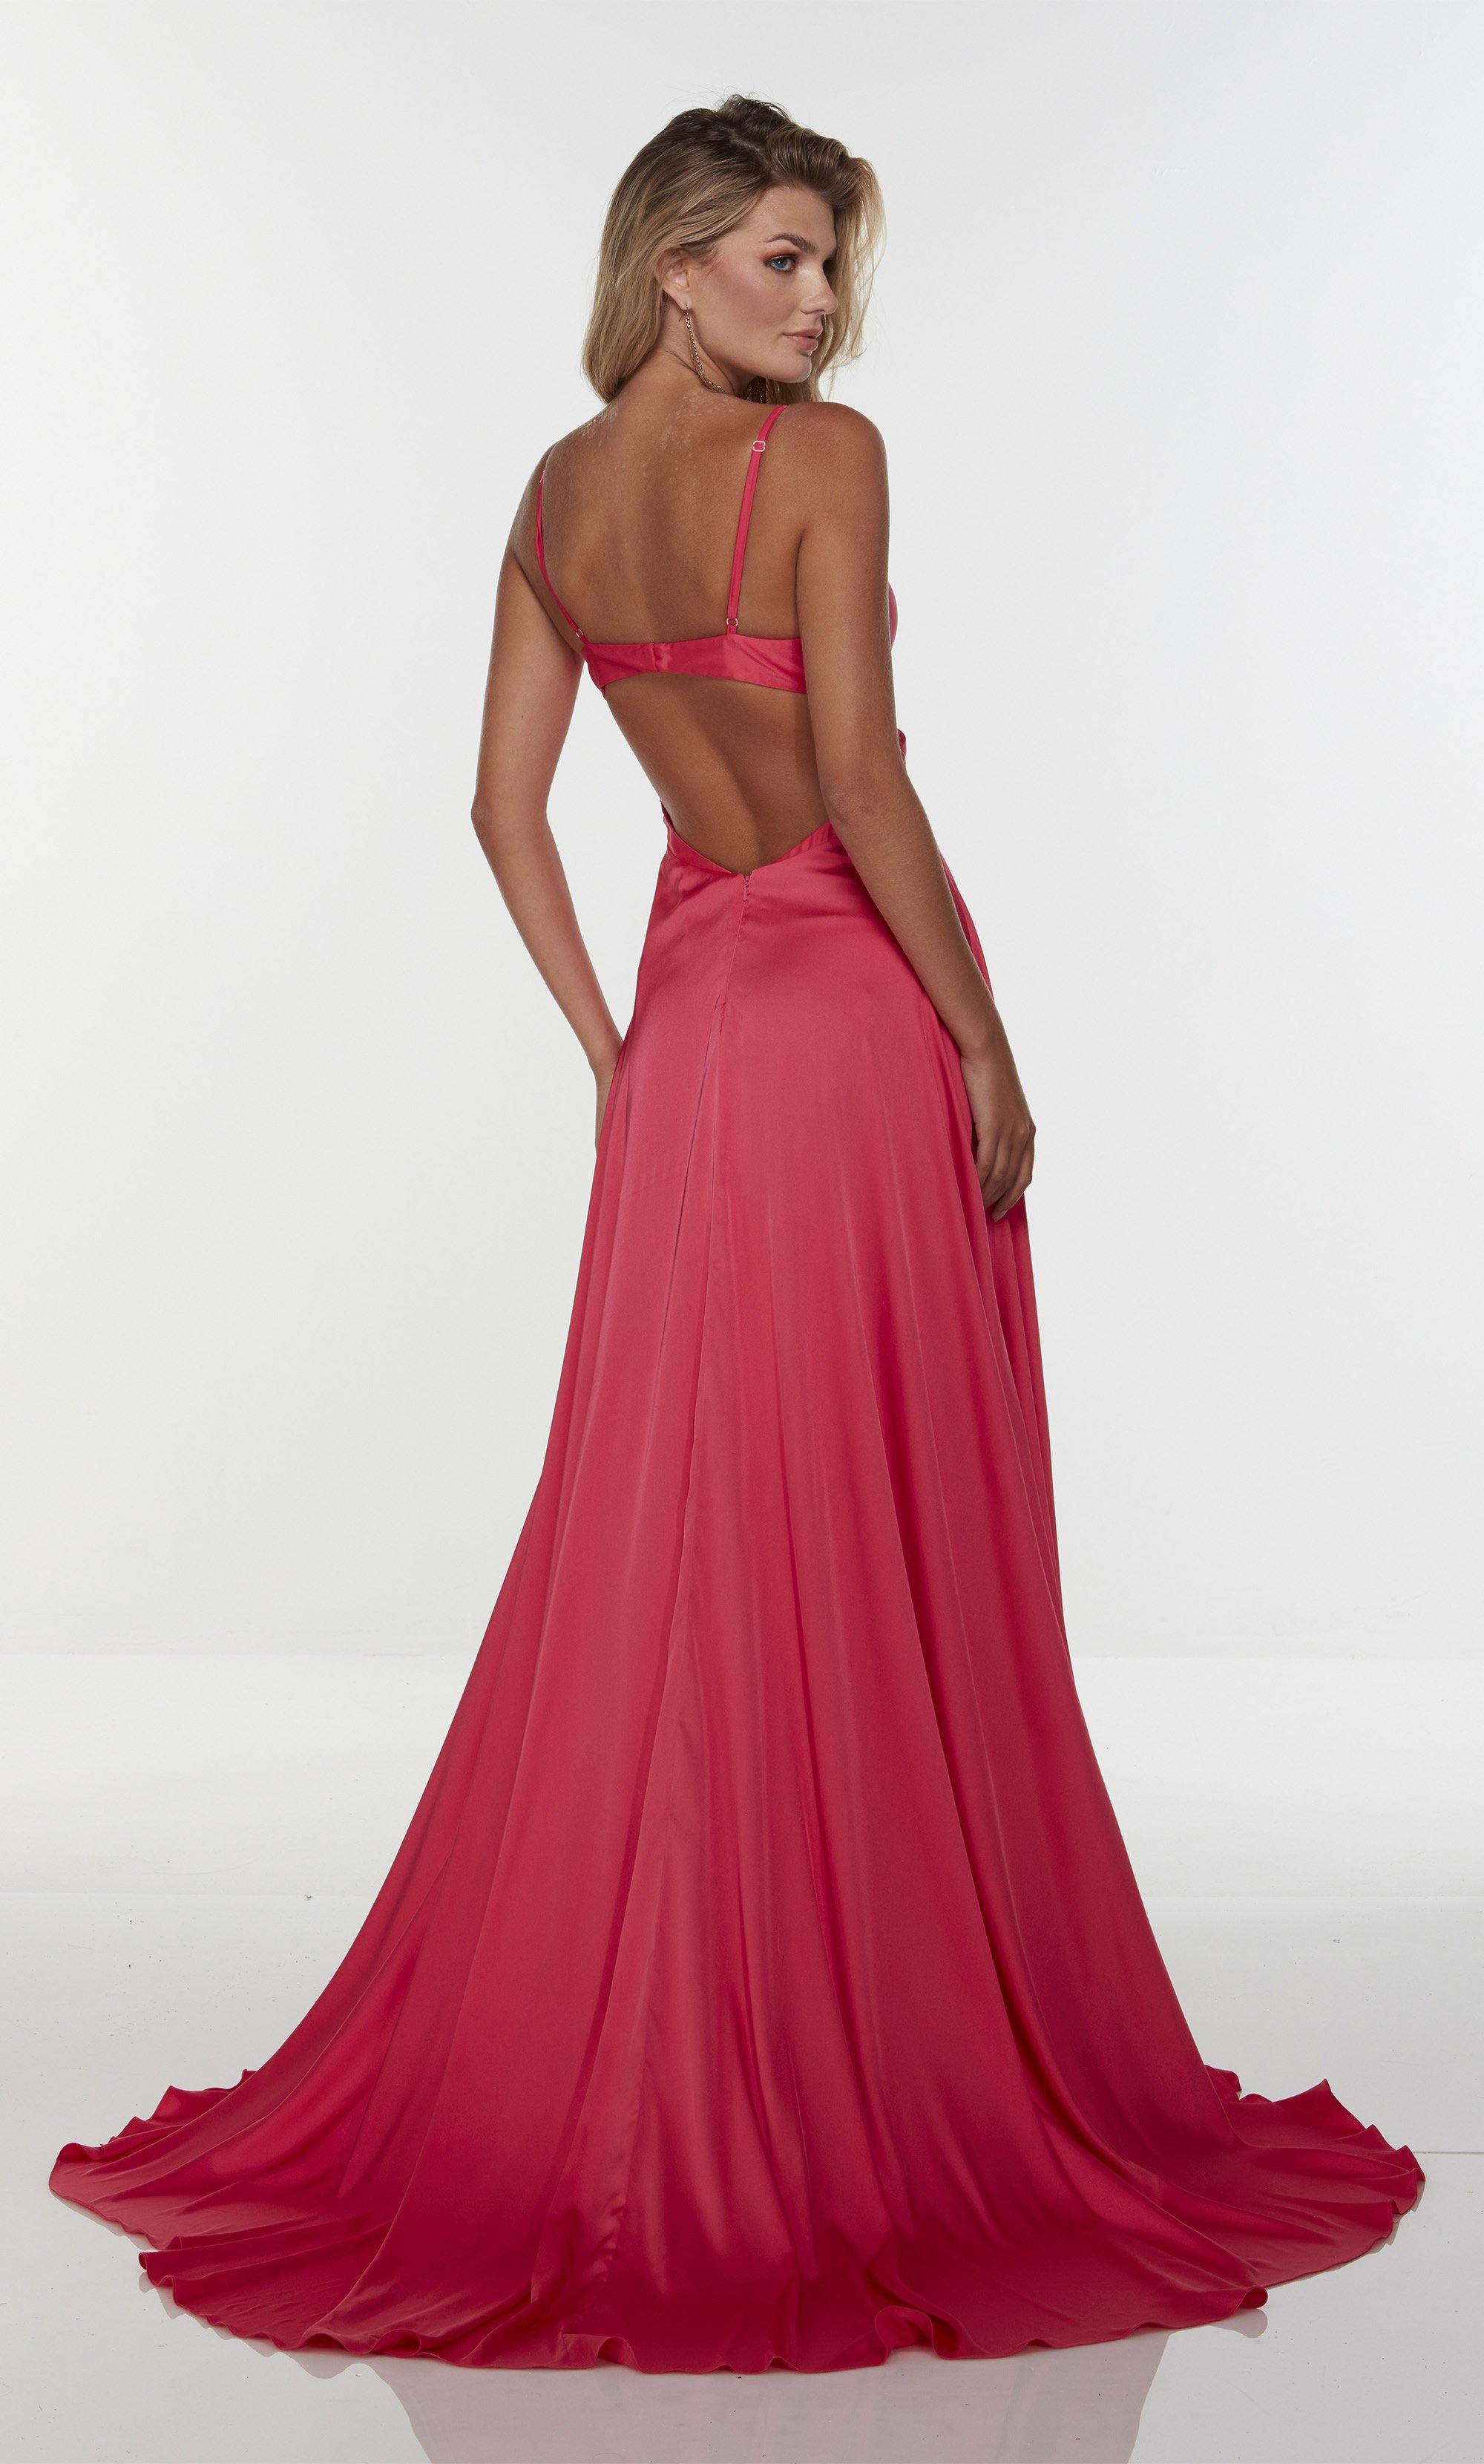 Long hot pink double slit dress with a v neck and side cut outs.